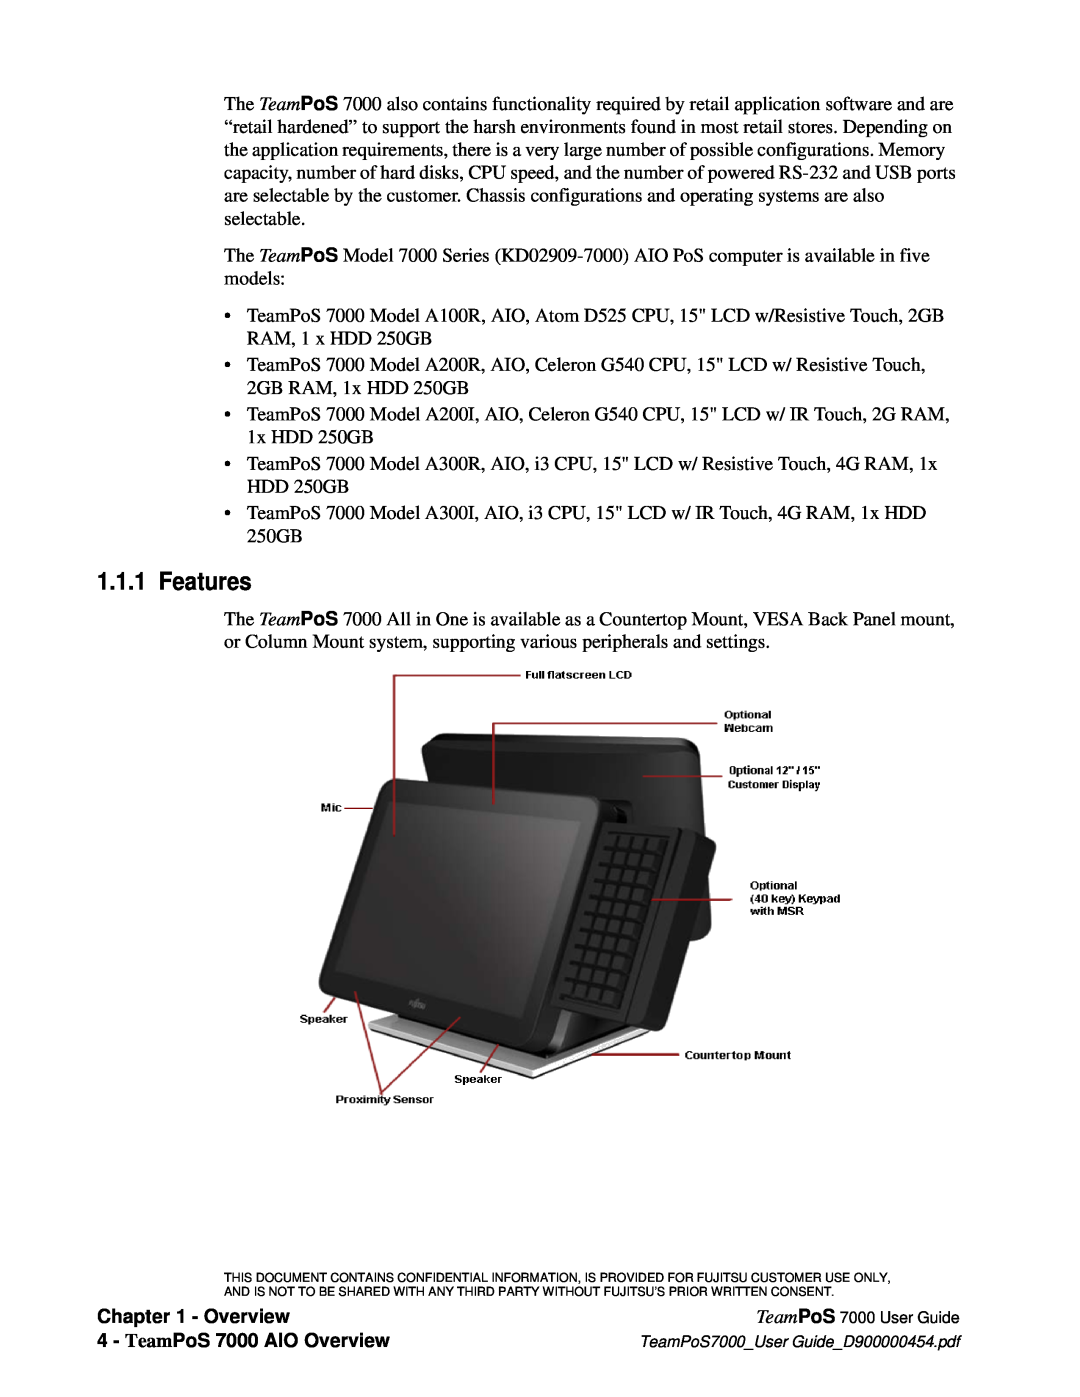 Fujitsu manual Features, TeamPoS 7000 AIO Overview 